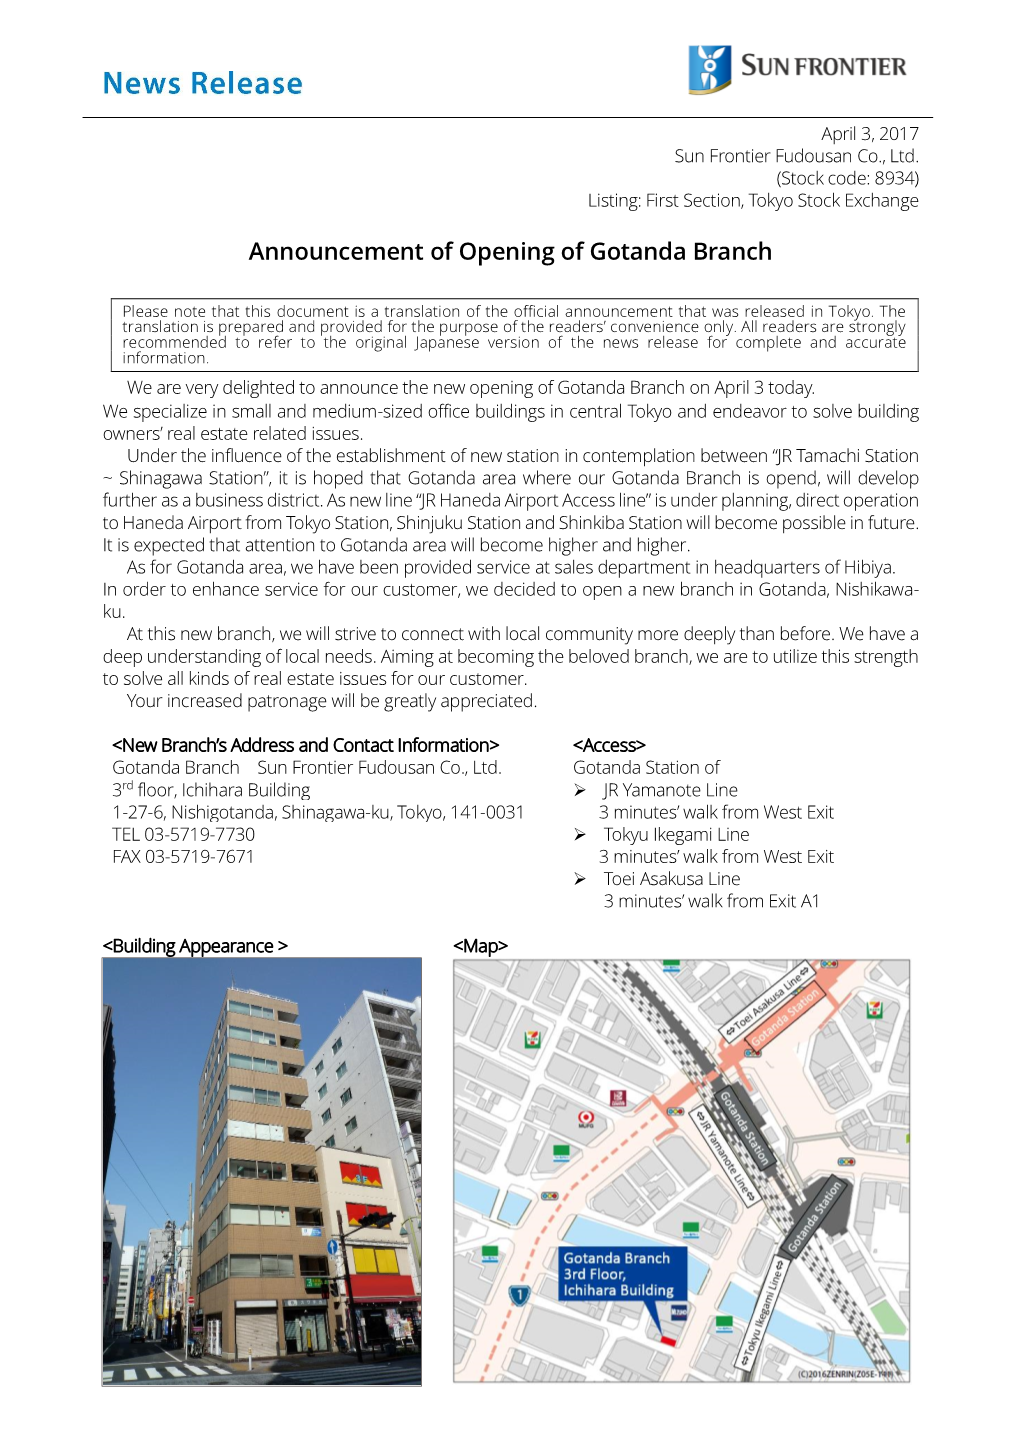 Announcement of Opening of Gotanda Branch